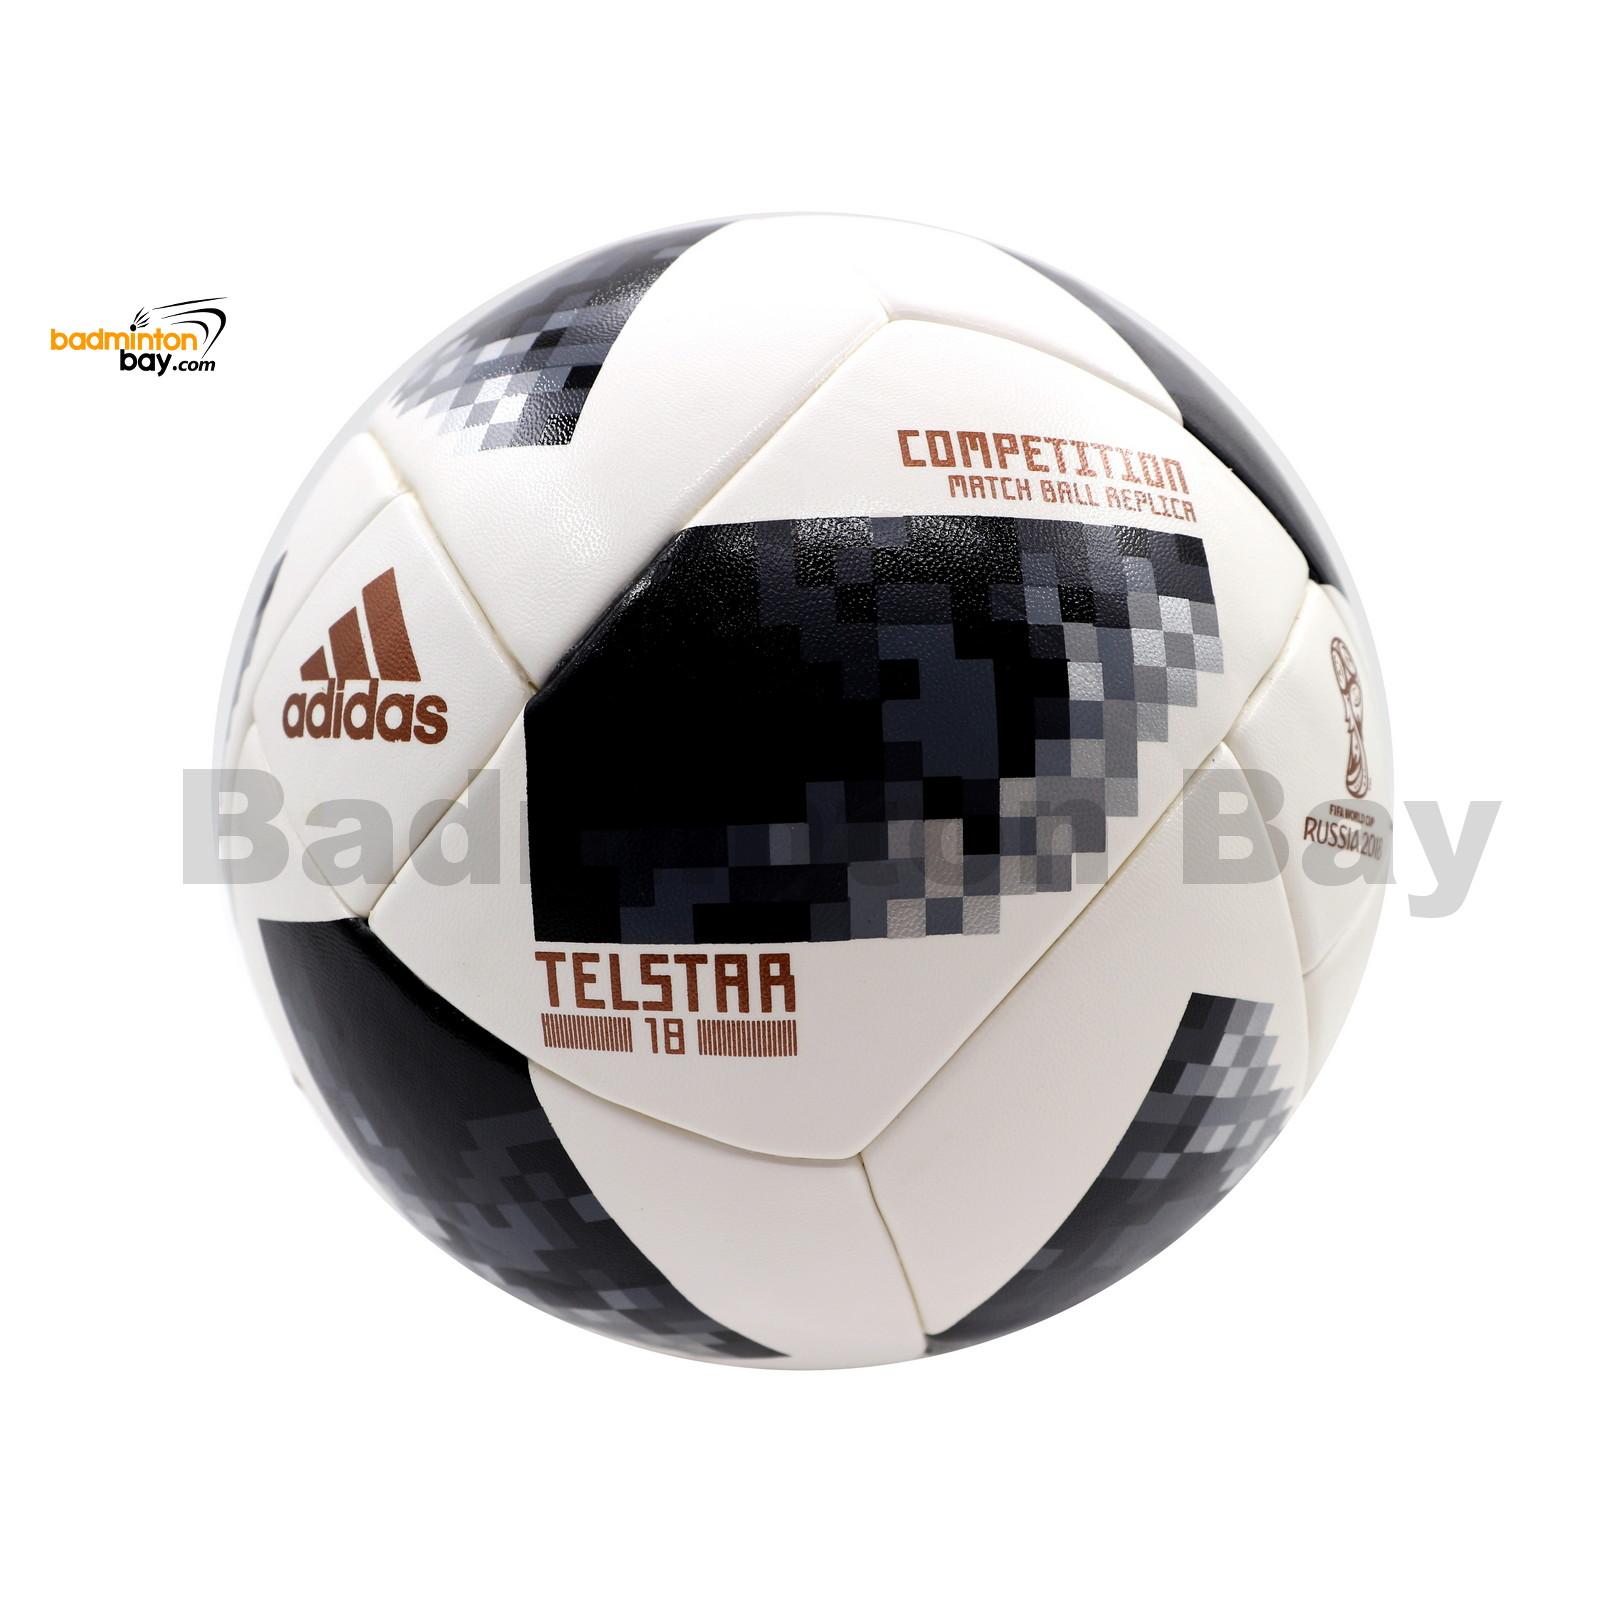 Genuine Adidas FIFA World Cup 2018 Telstar 18 Competition Ball Soccer  Football Size 5 Russia